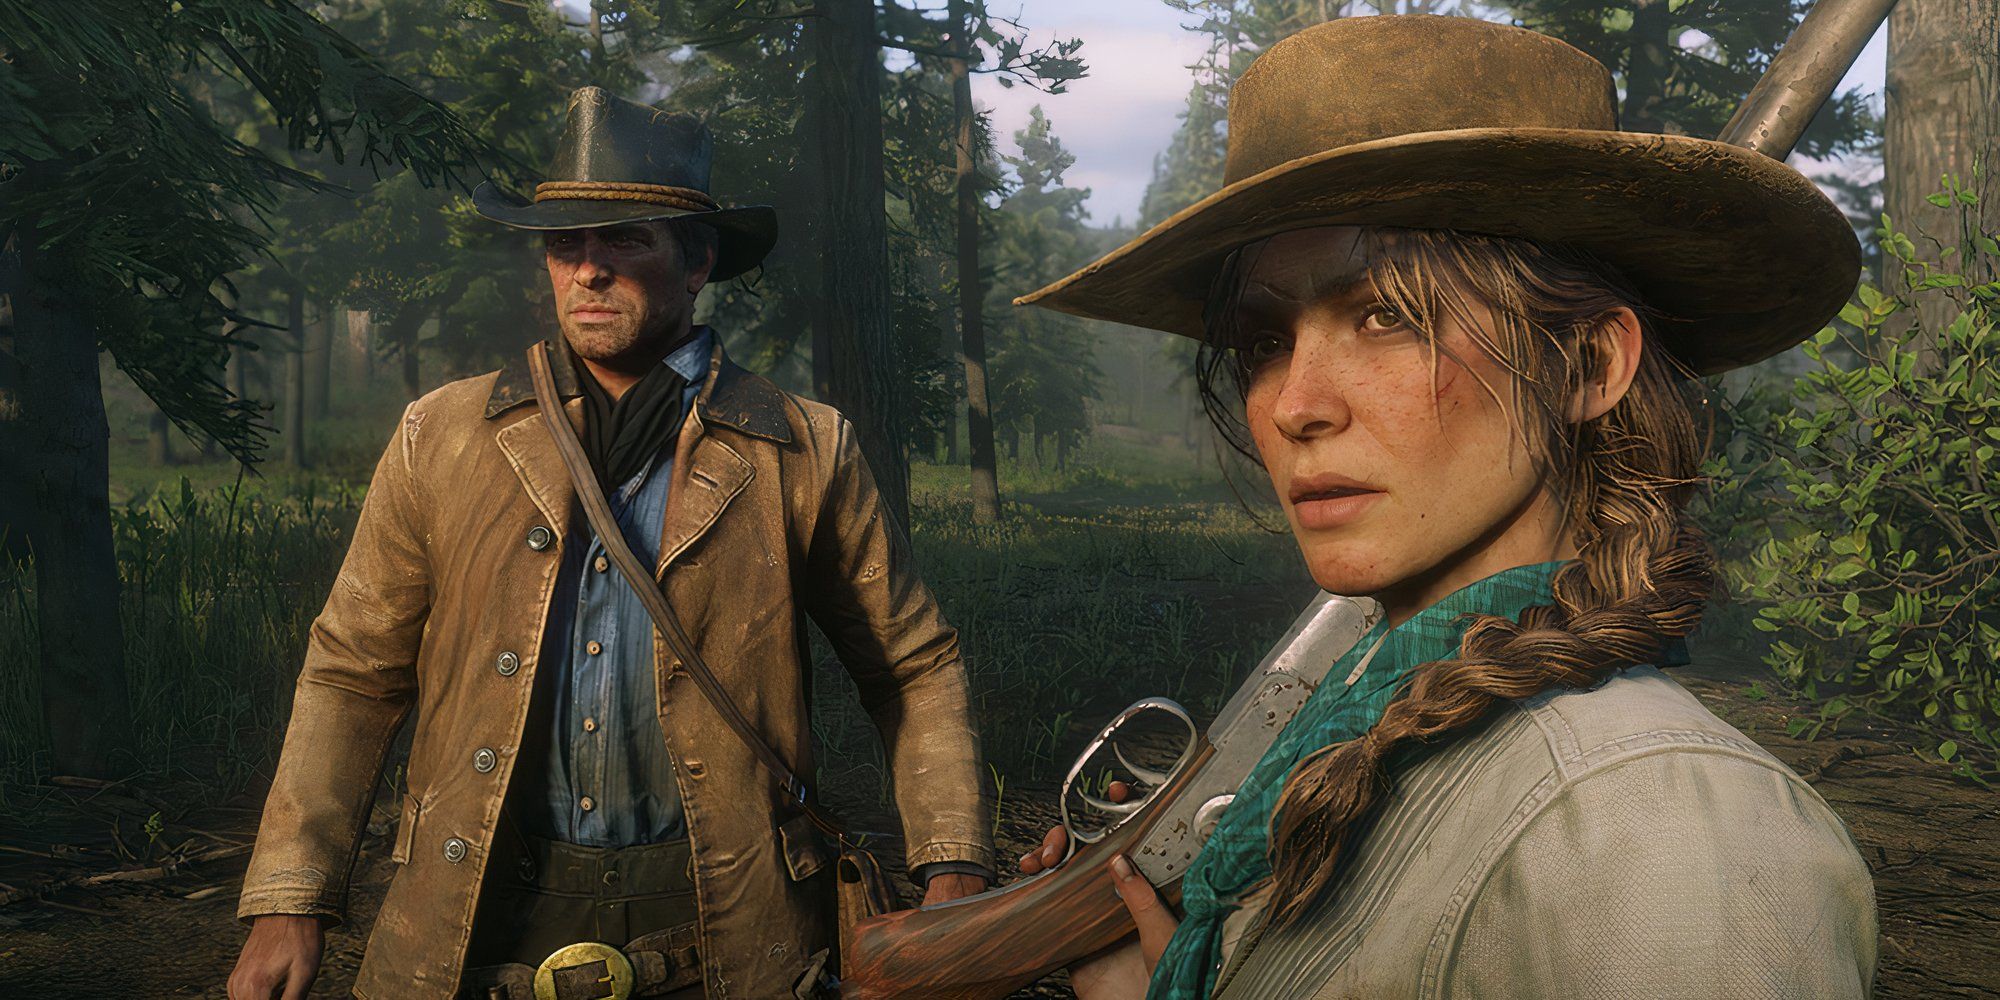 Arthur and Sadie staring at something off-camera in a forest